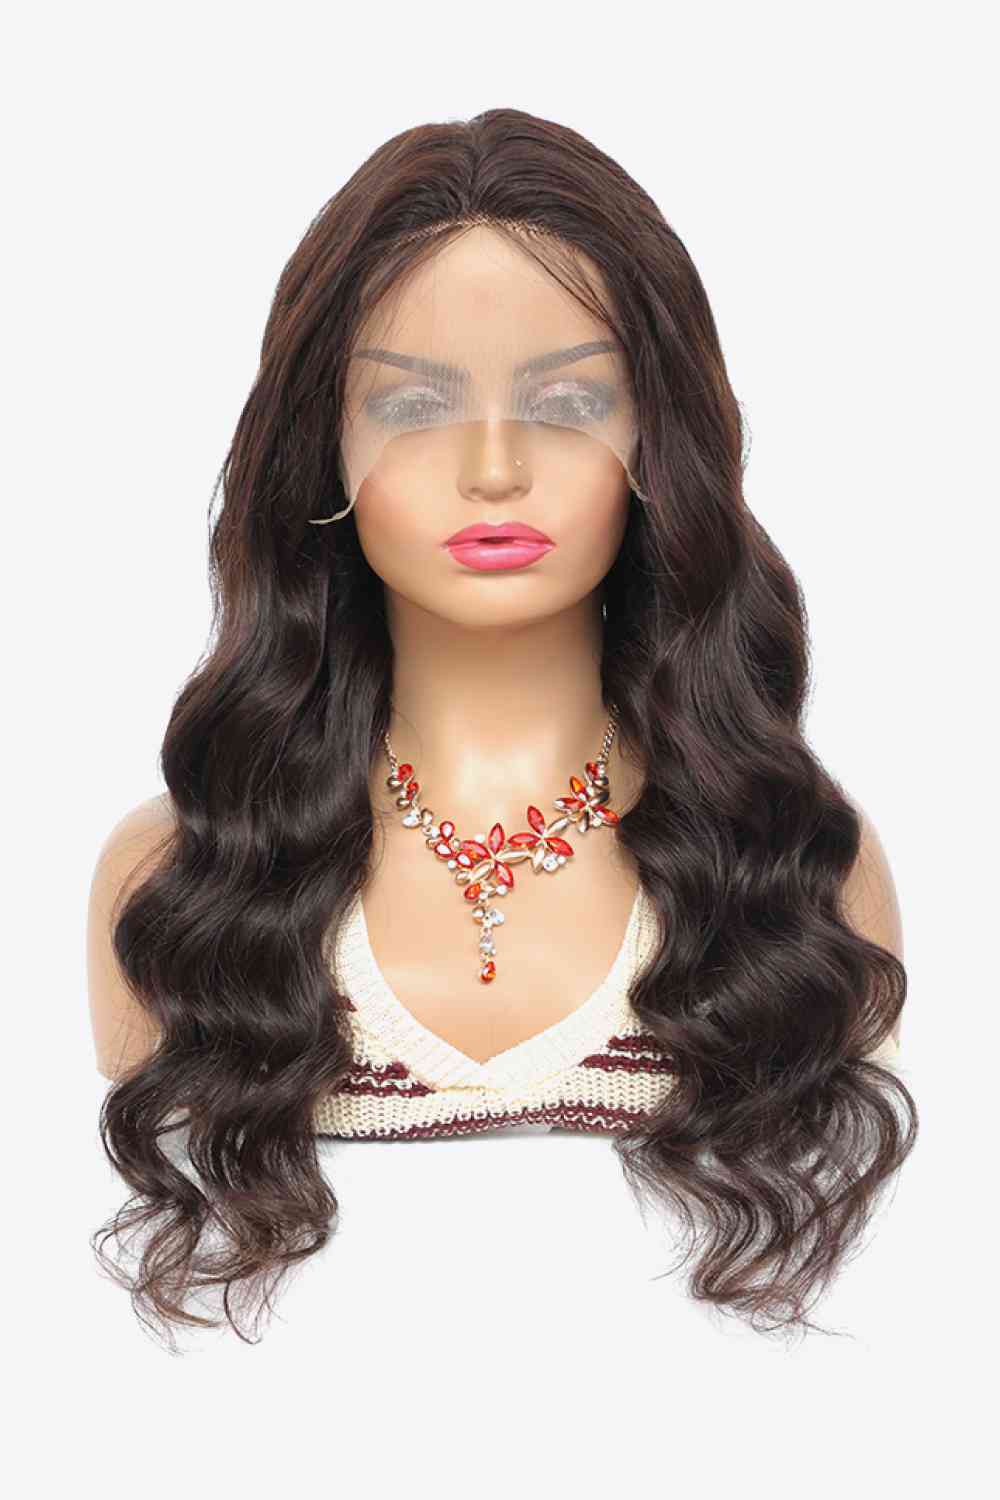 Brazilian Remy 20" 13x4 Lace Front Wigs Body Wave Human Virgin Hair Natural Color 150% Density